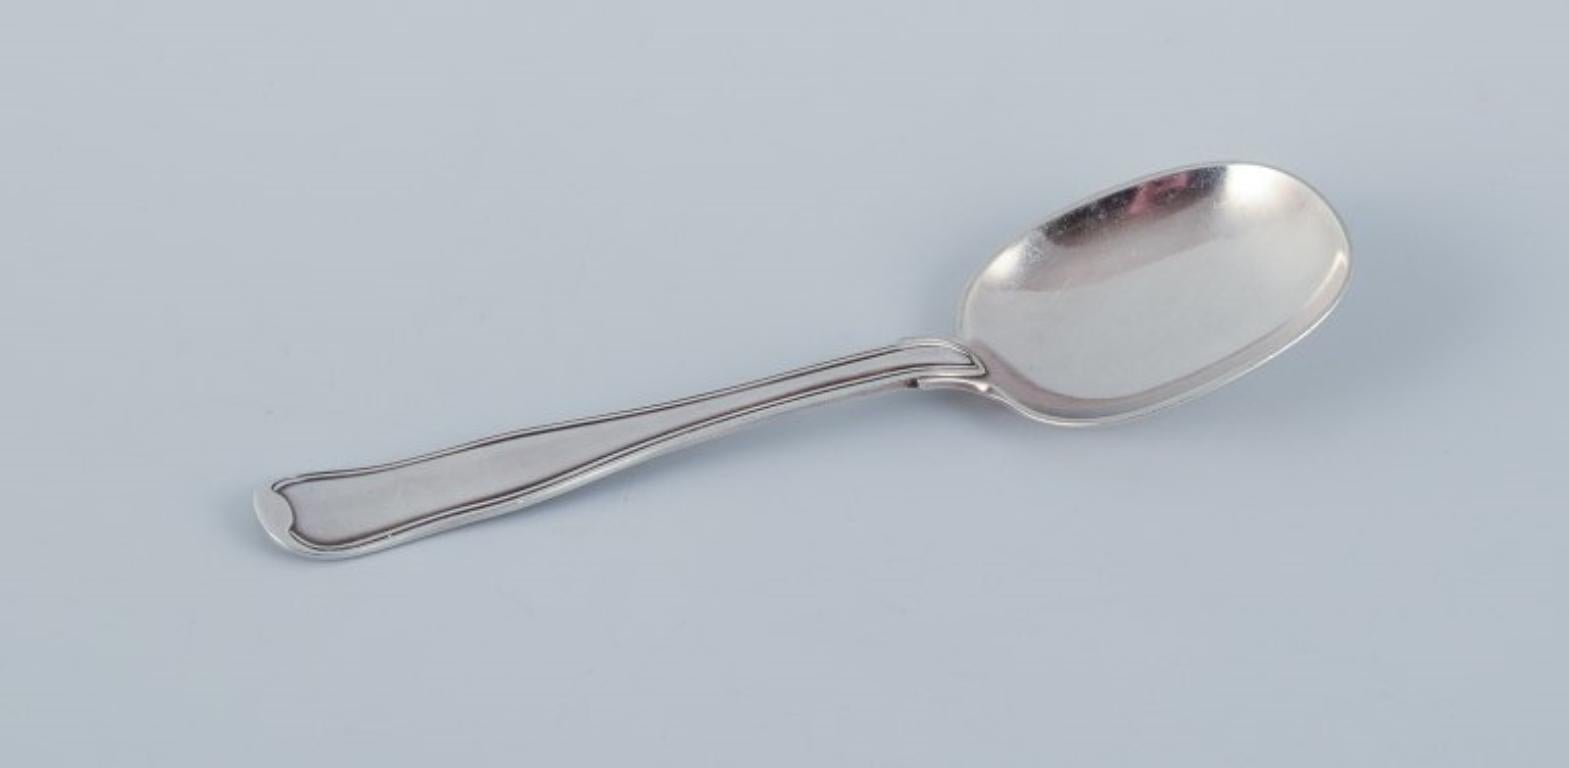 Georg Jensen Old Danish, sugar spoon in sterling silver.
Stamped with 1945-1951 hallmark.
In excellent condition.
Dimensions: L 14.5 cm.
